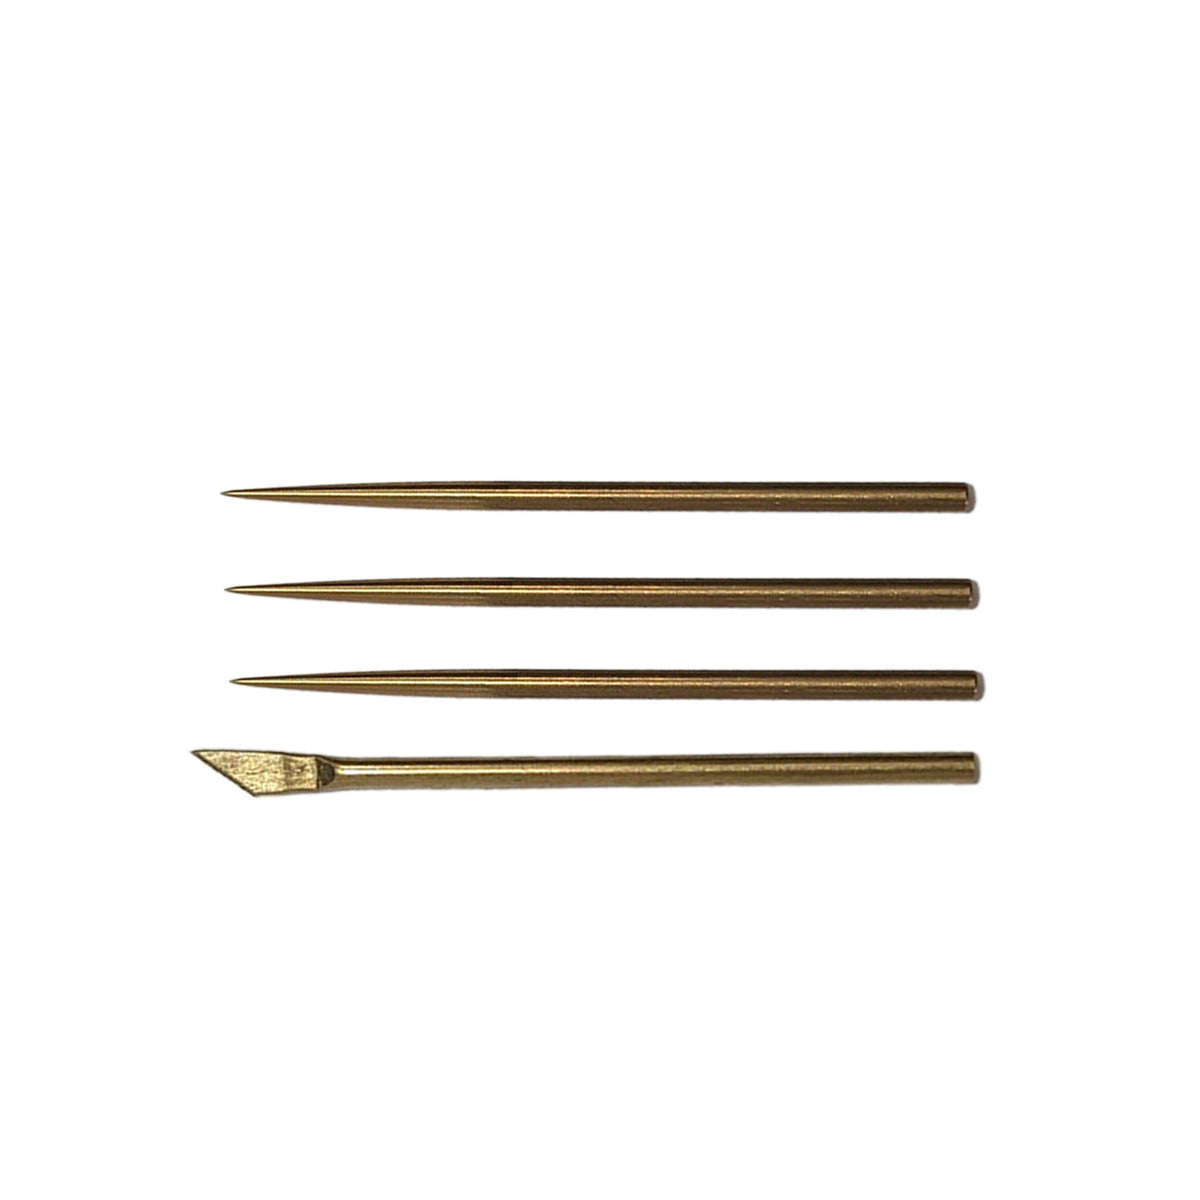 Brass Brush Insert for Composite Cleaning Pencil